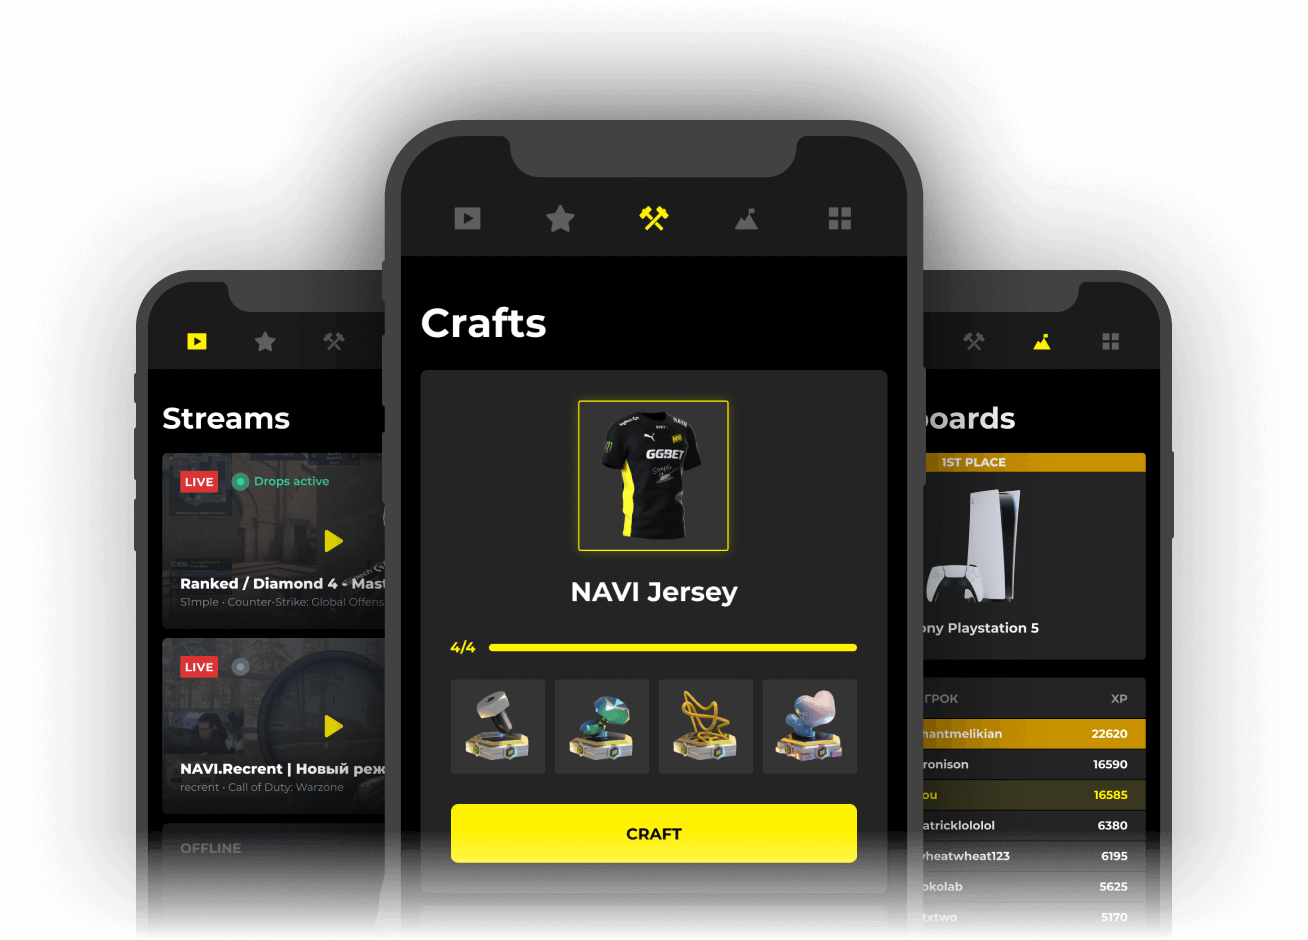 Watch NAVI streams, get items and craft packs with valuable gifts inside!